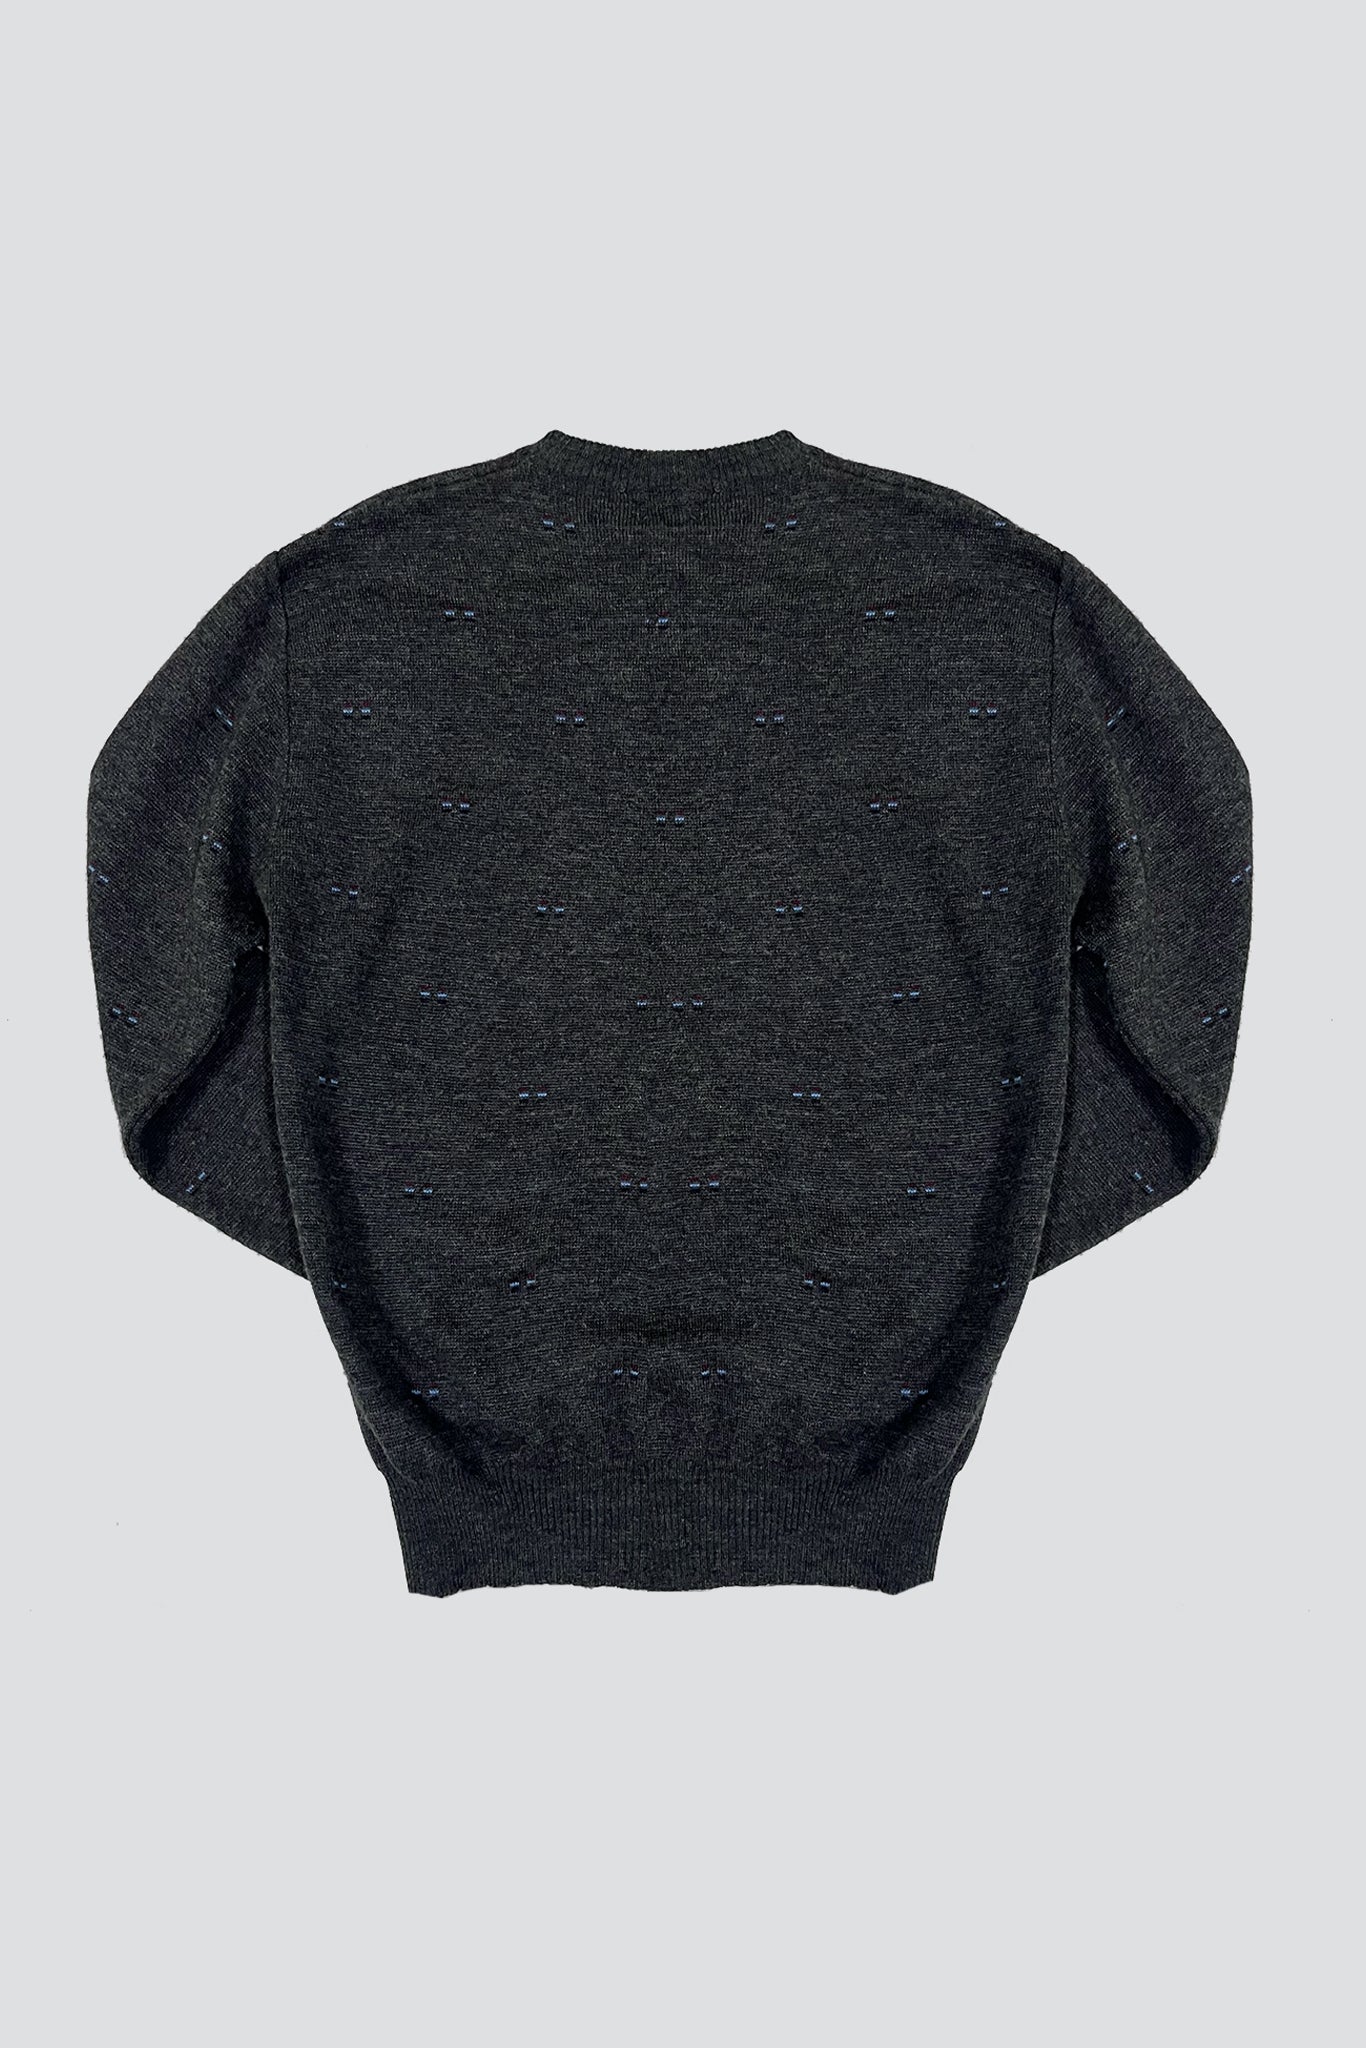 Givenchy Charcoal Stitch Pullover